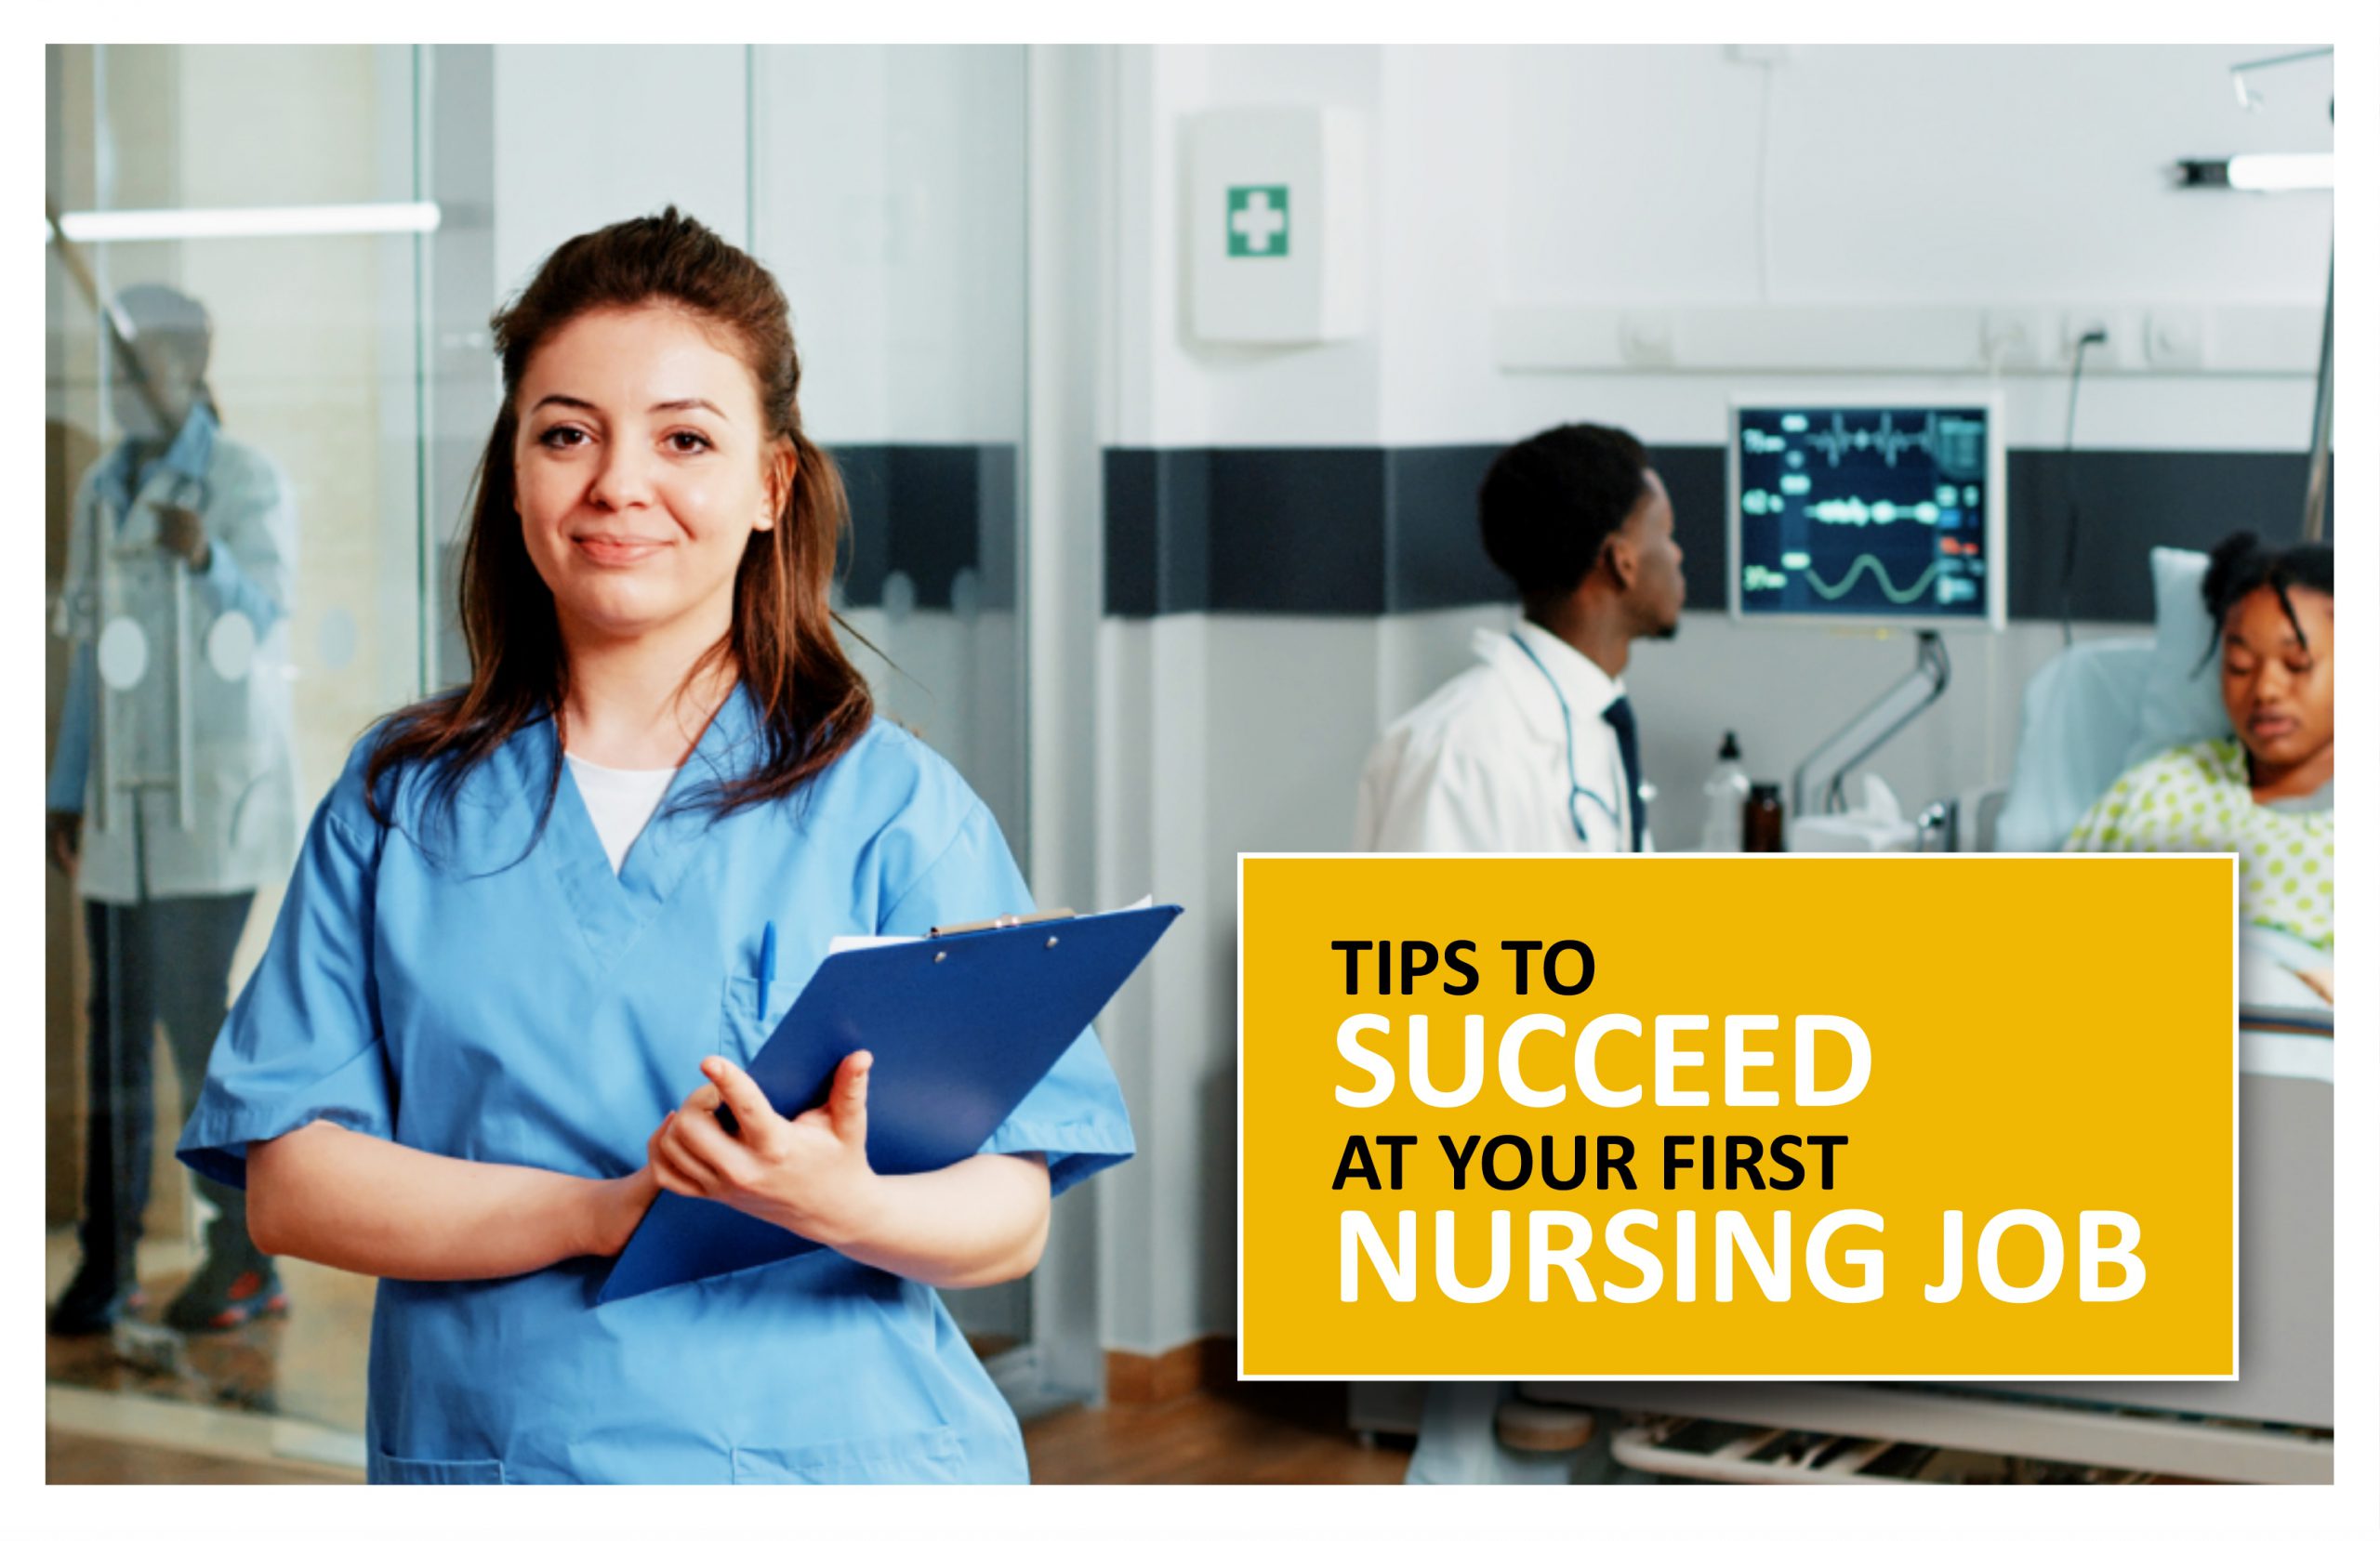 TIPS TO SUCCEED AT YOUR FIRST NURSING JOB